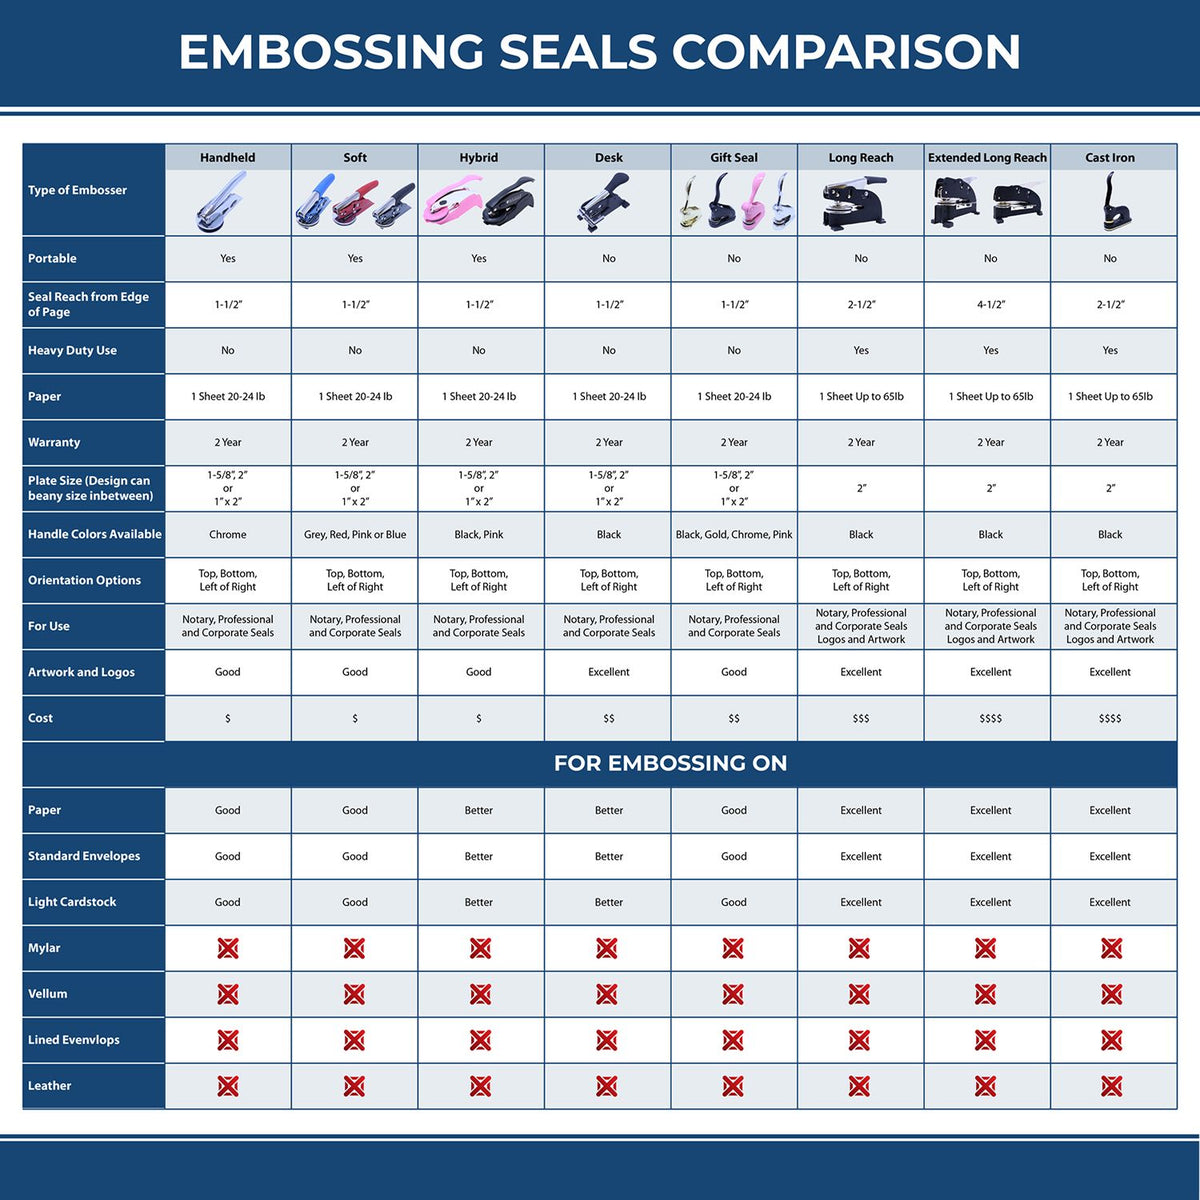 A comparison chart for the different types of mount models available for the Hybrid Utah Architect Seal